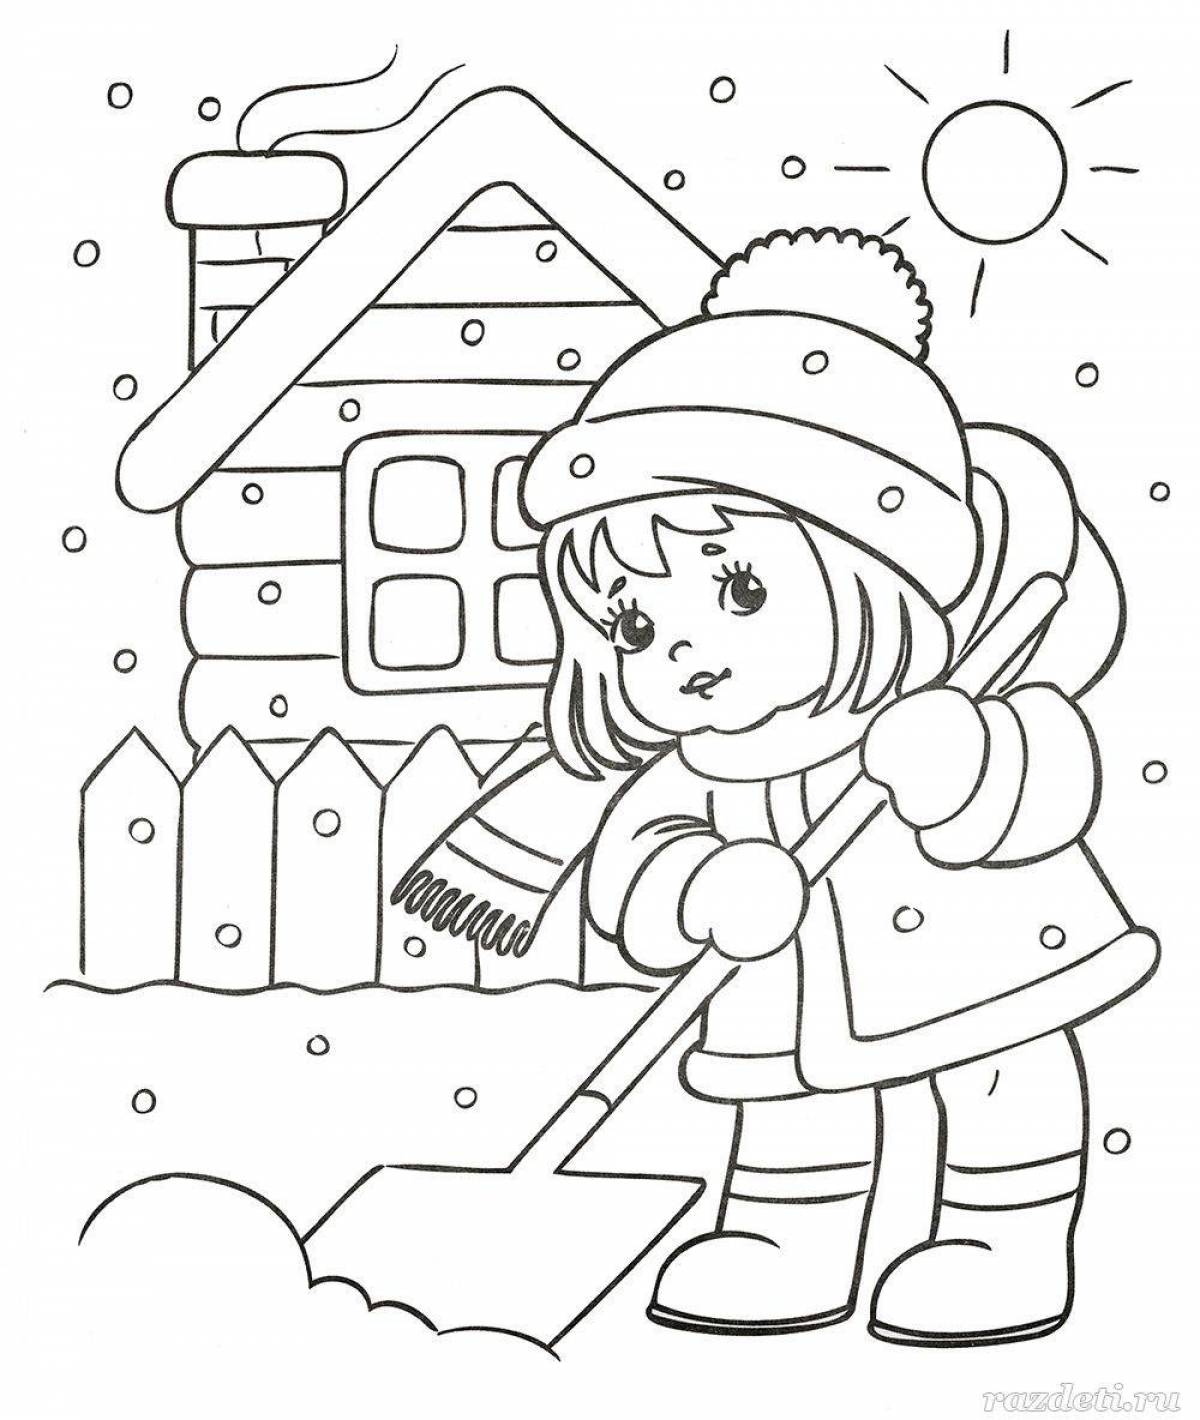 Adorable winter coloring book for 4-5 year olds